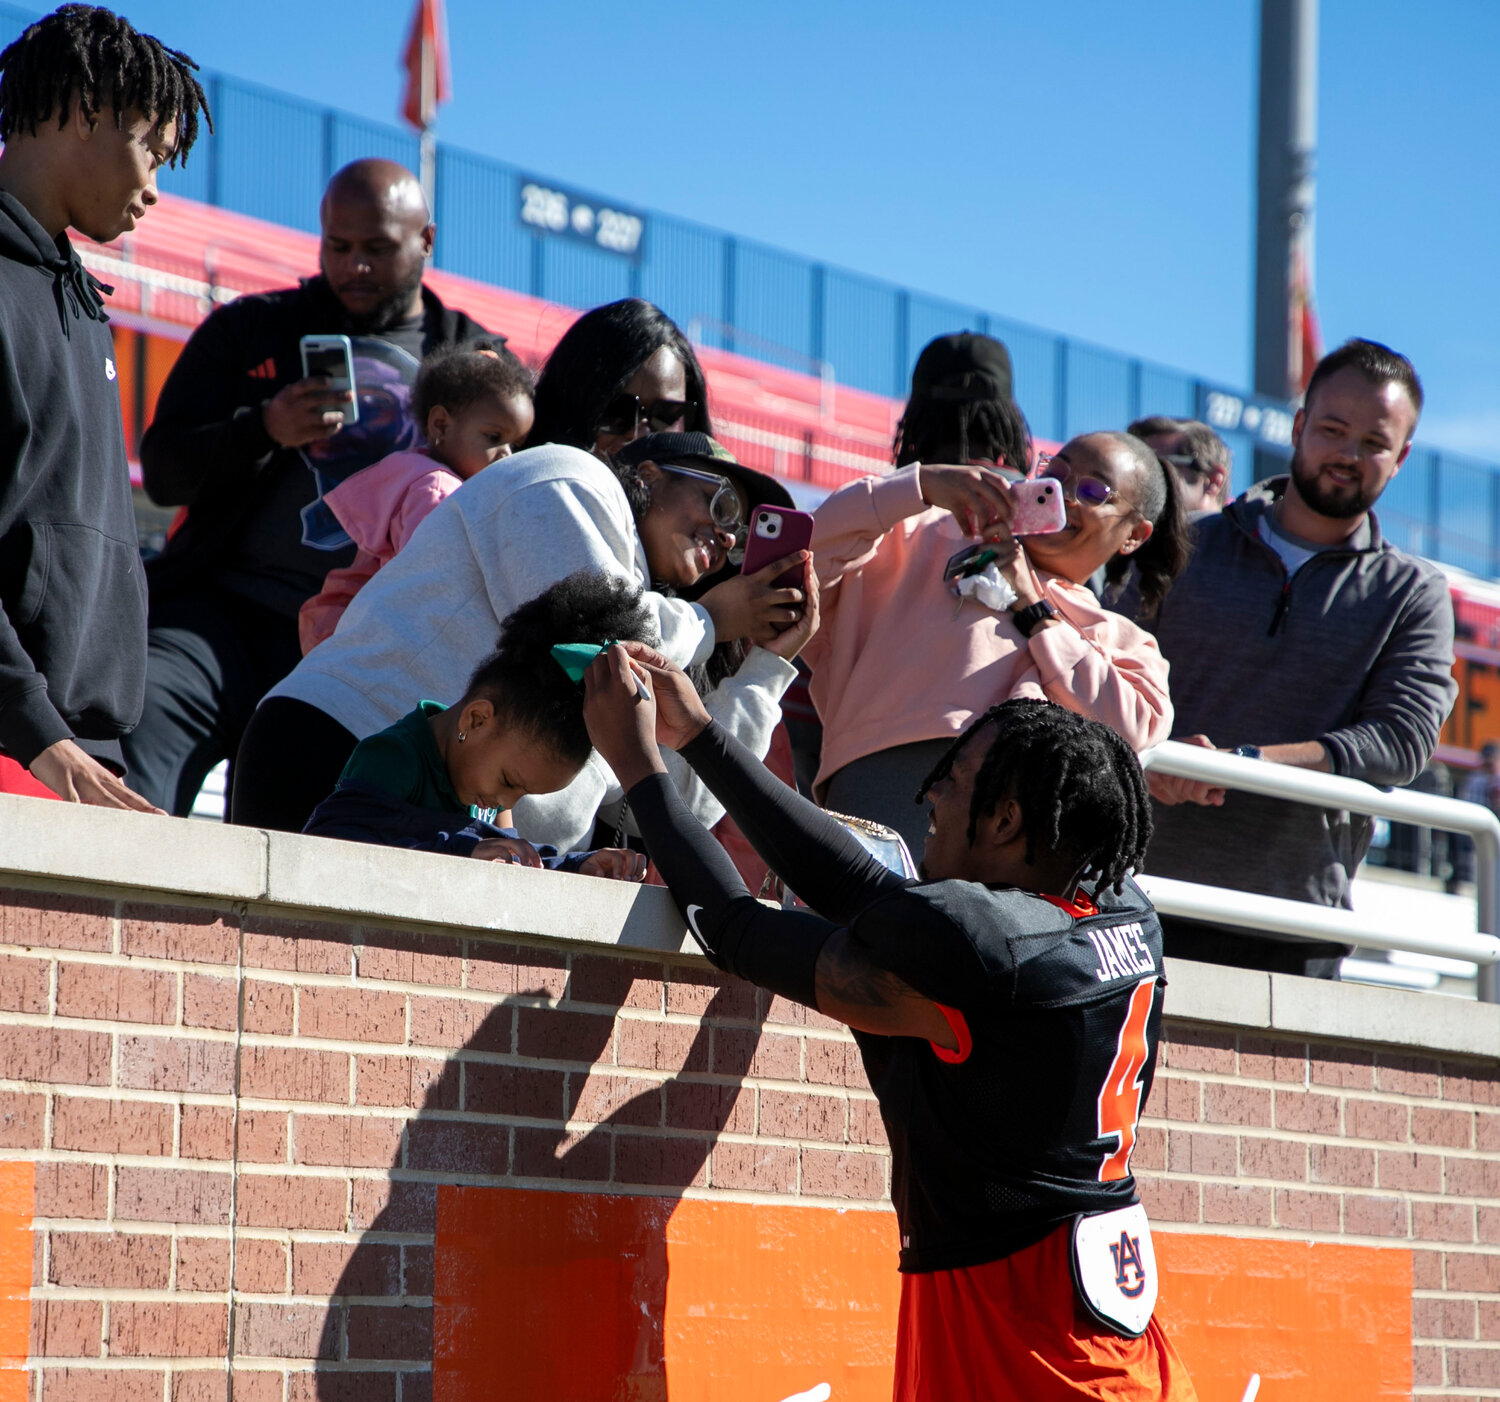 DJ James signs an autograph after Wednesday’s Senior Bowl practice on Wednesday, Jan. 31, at Hancock Whitney Stadium.